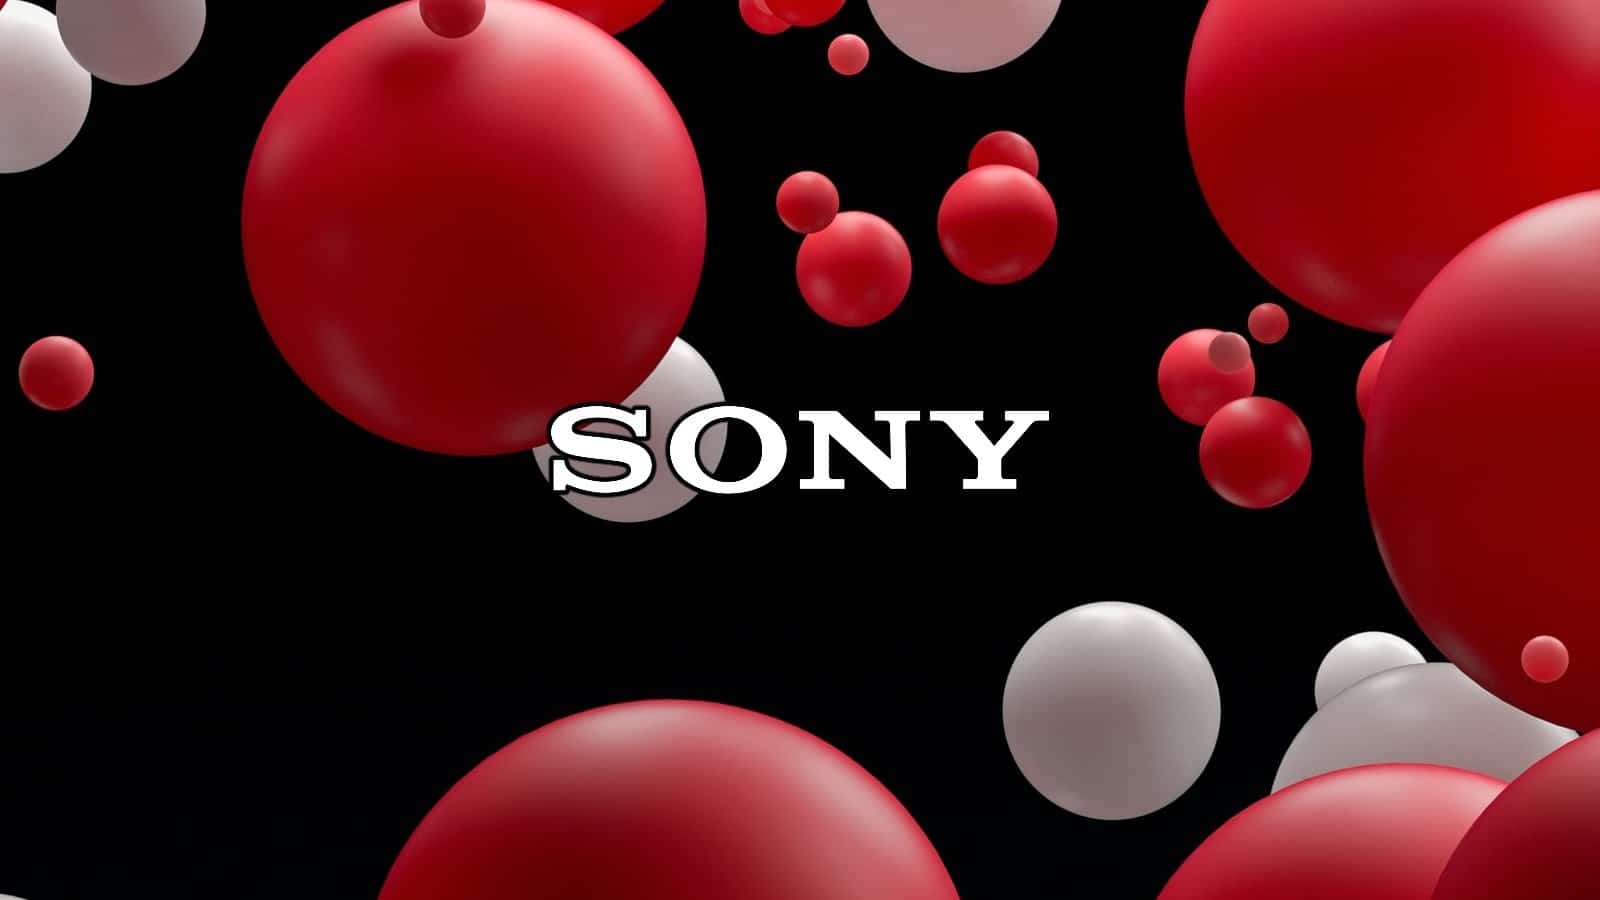 Sony confirms data breach impacting thousands in the U.S.